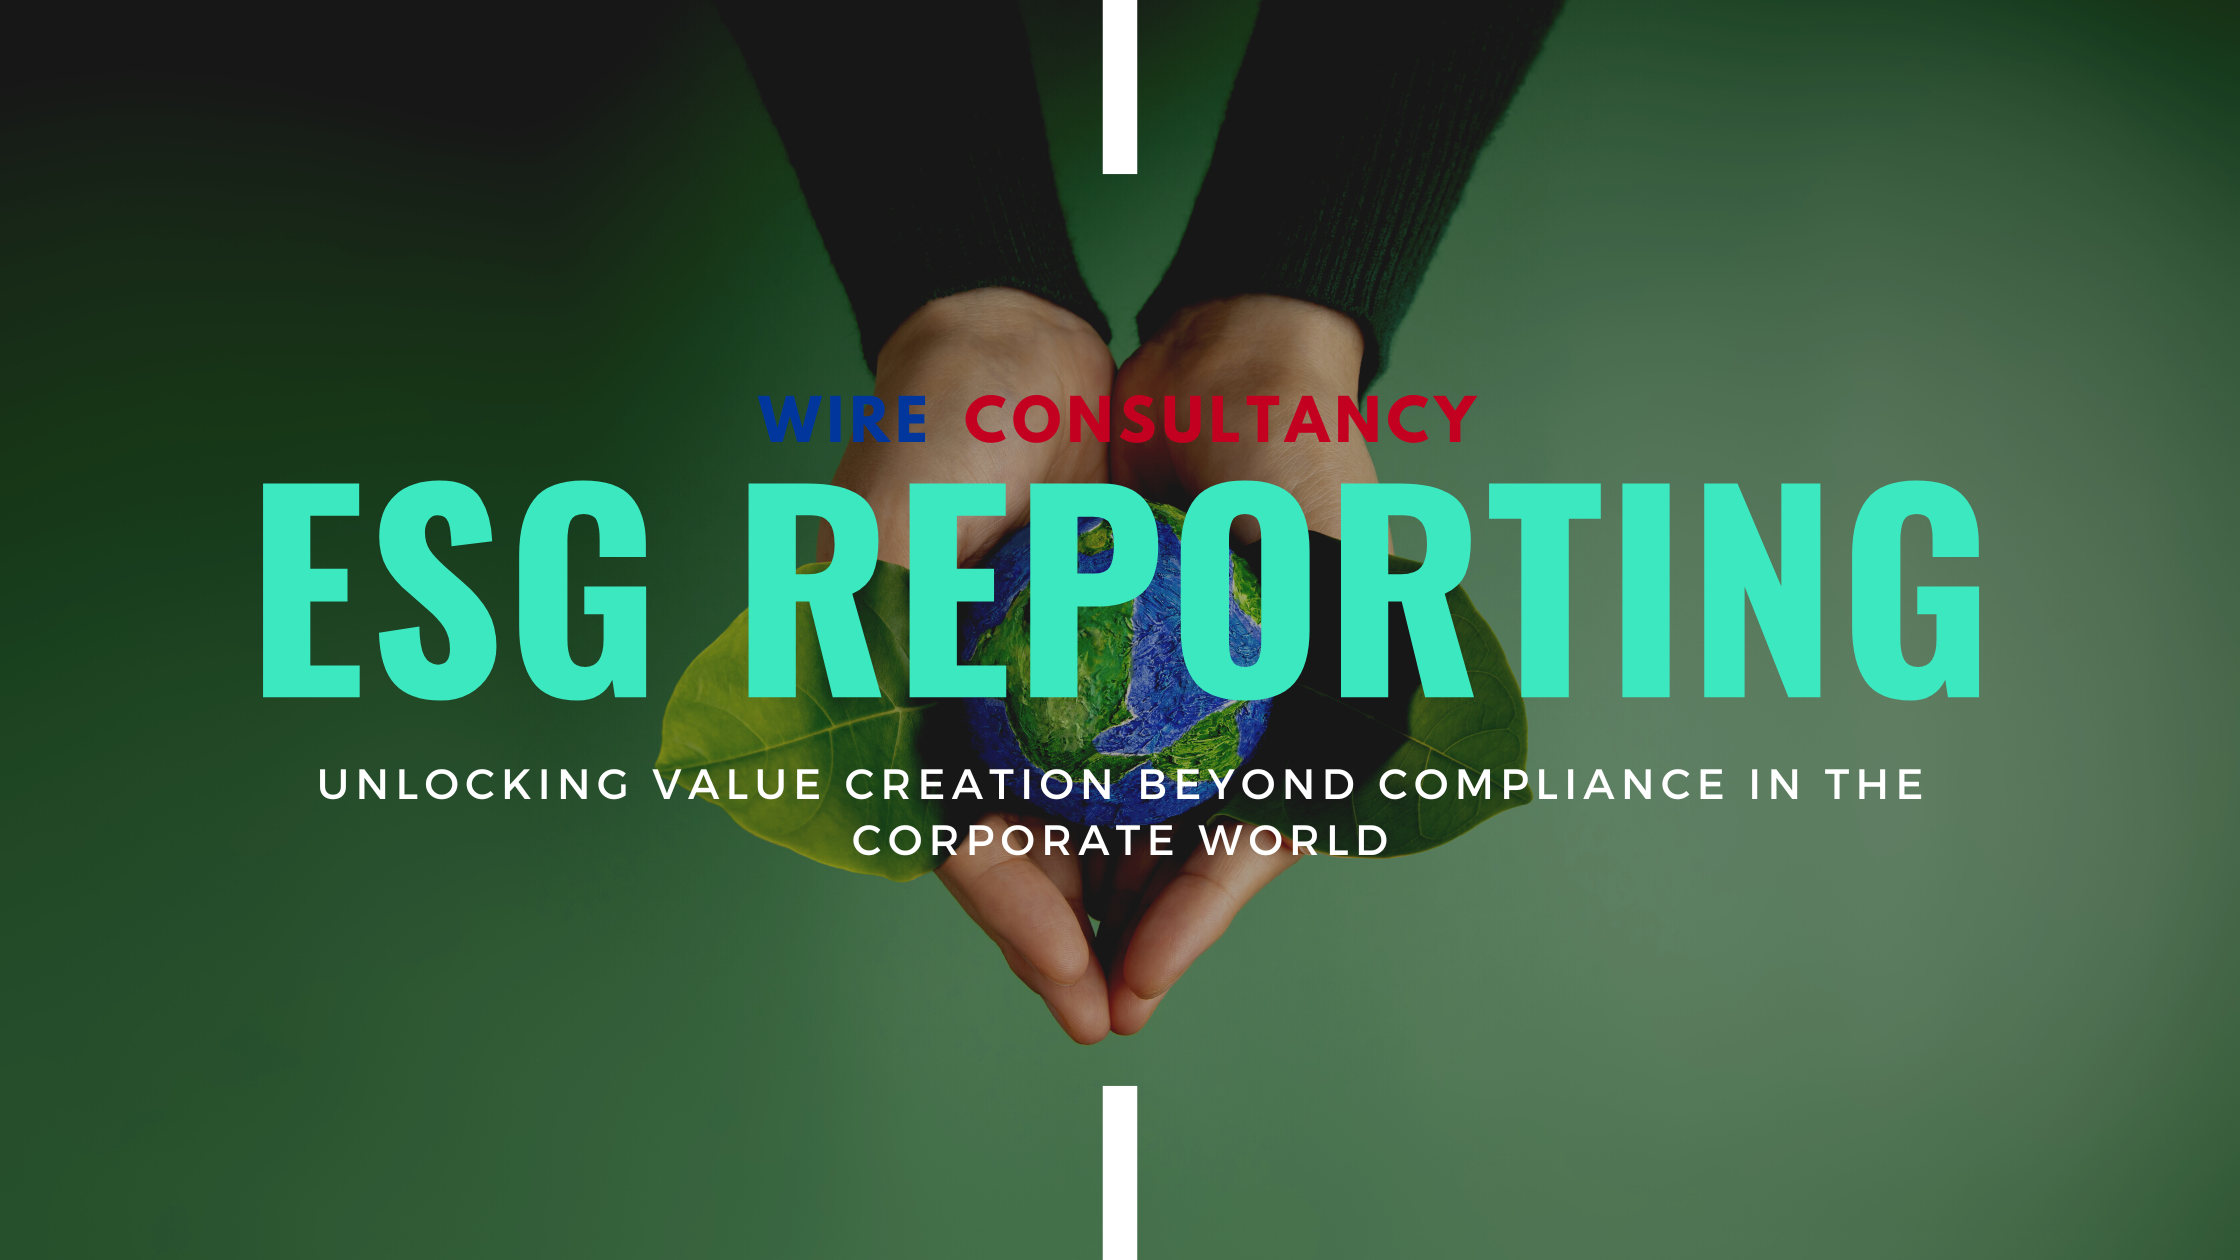 ESG Reporting: Unlocking Value Creation Beyond Compliance in the Corporate World